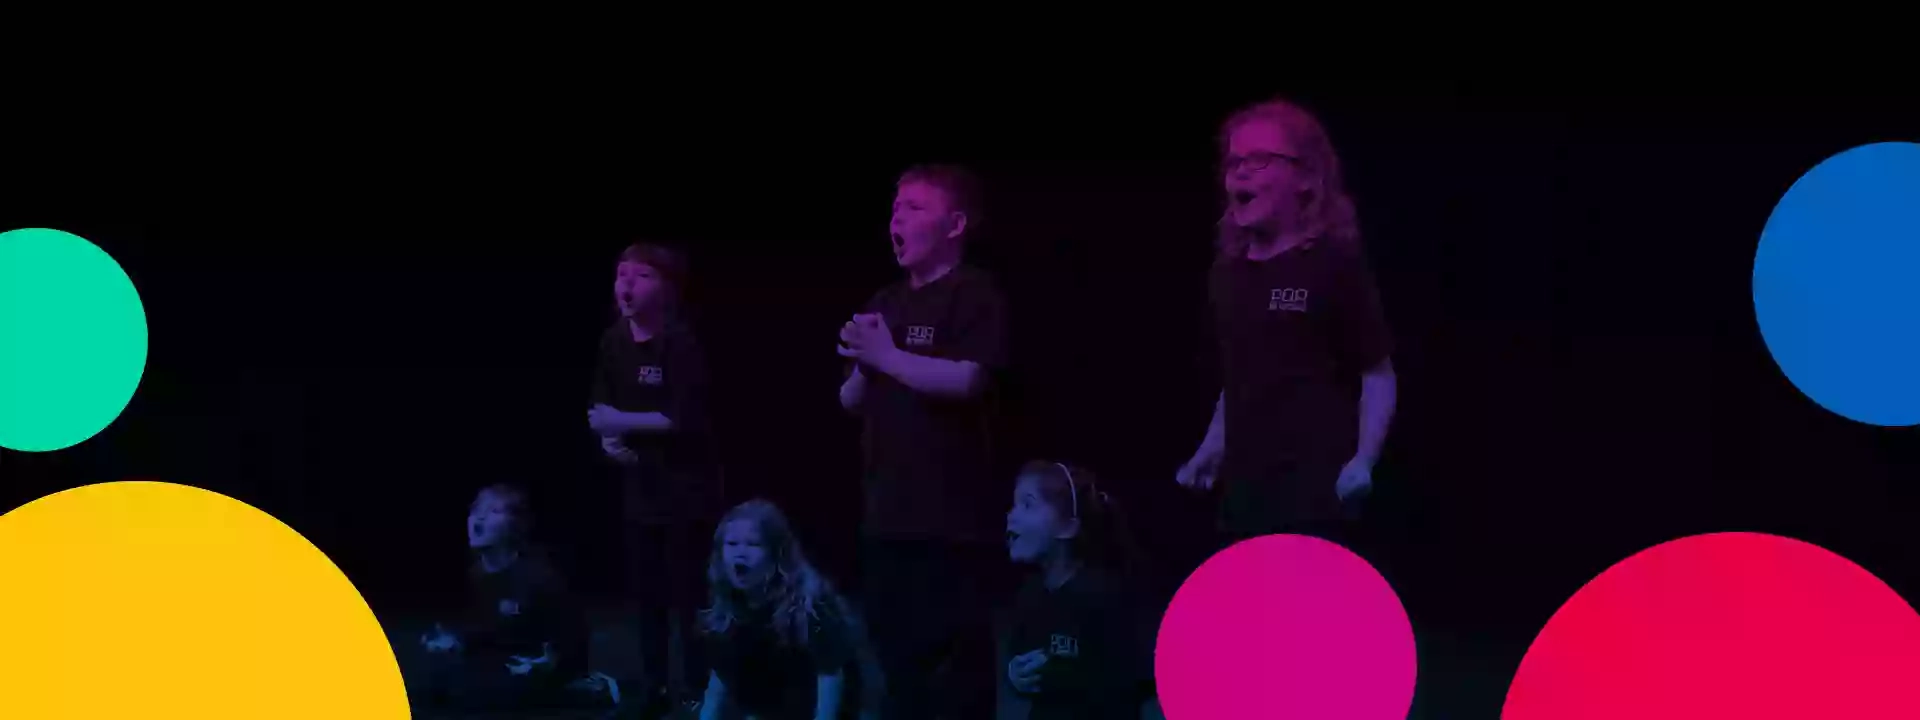 The Pauline Quirke Academy of Performing Arts Leicester